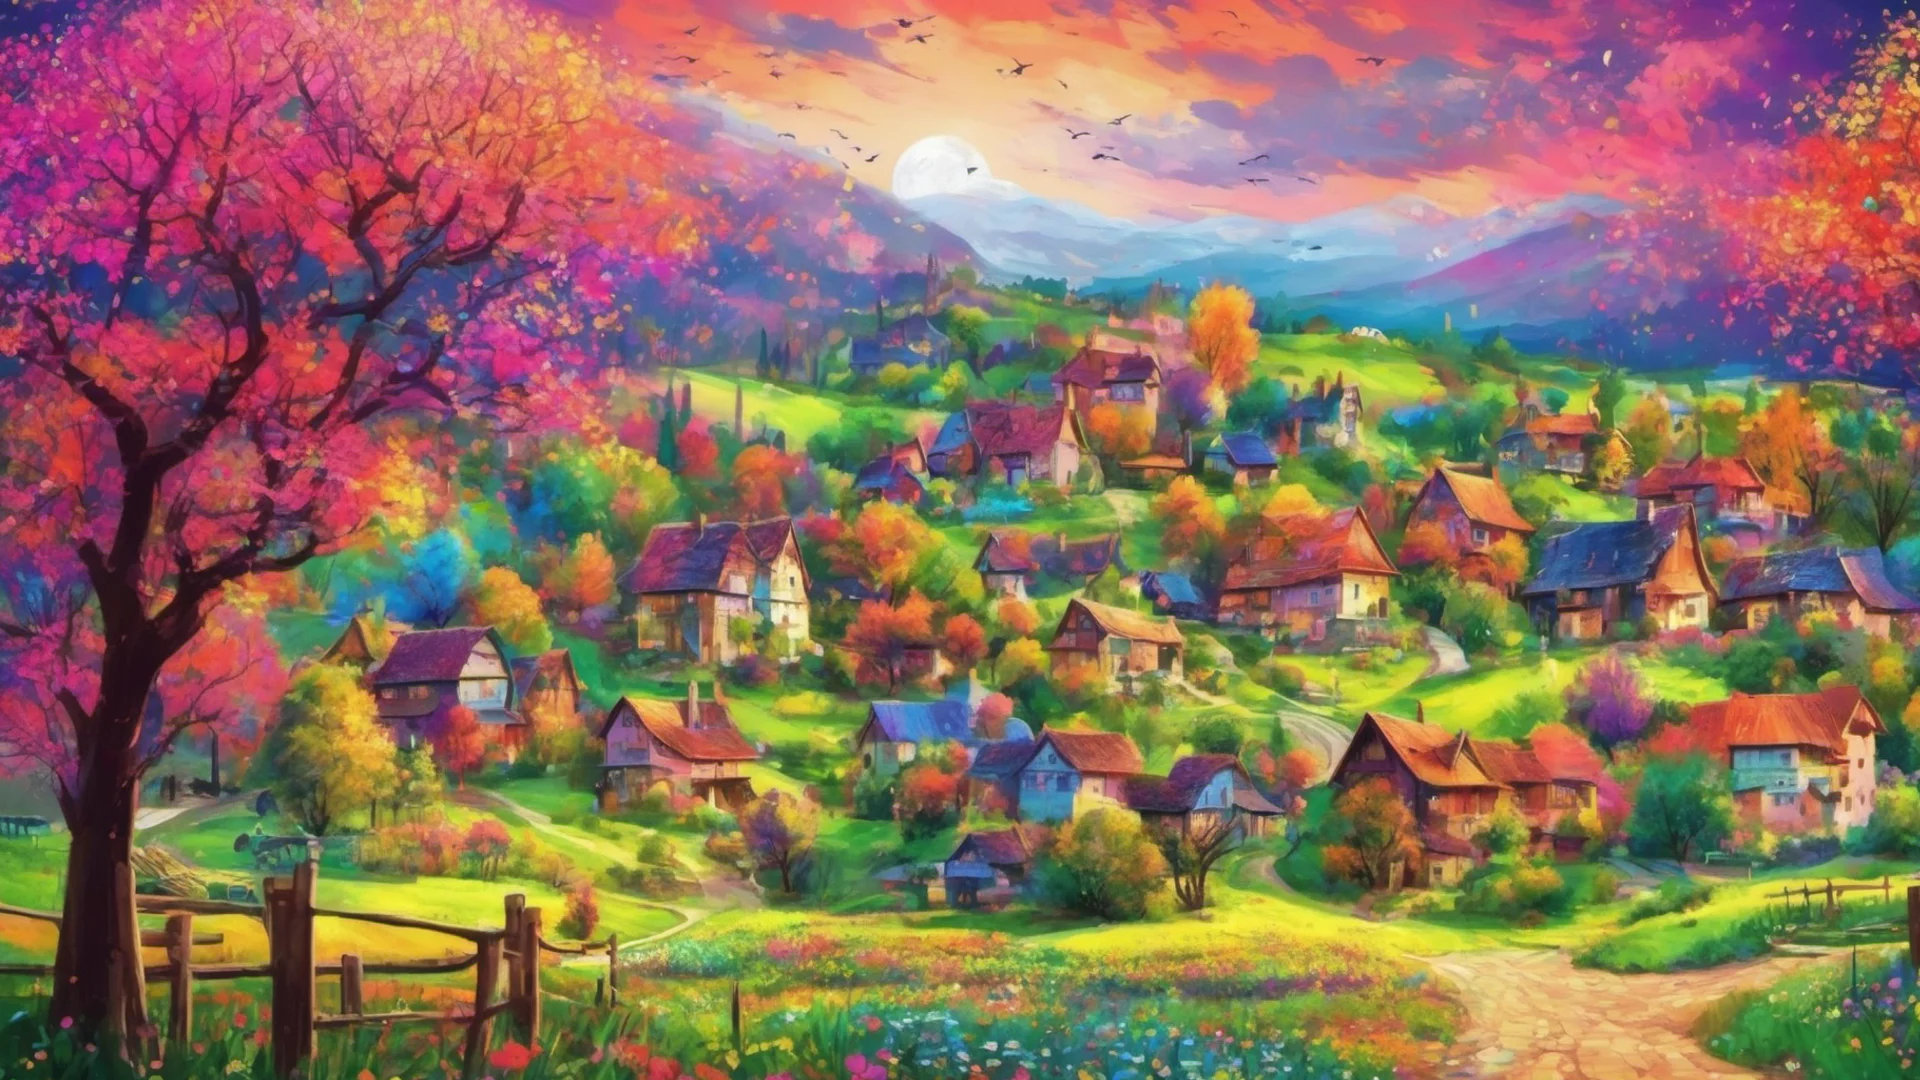 aicountryside village stunning colorful flowers colorful trees colorful stary sky epic lovely  amazing awesome portrait 2 wide